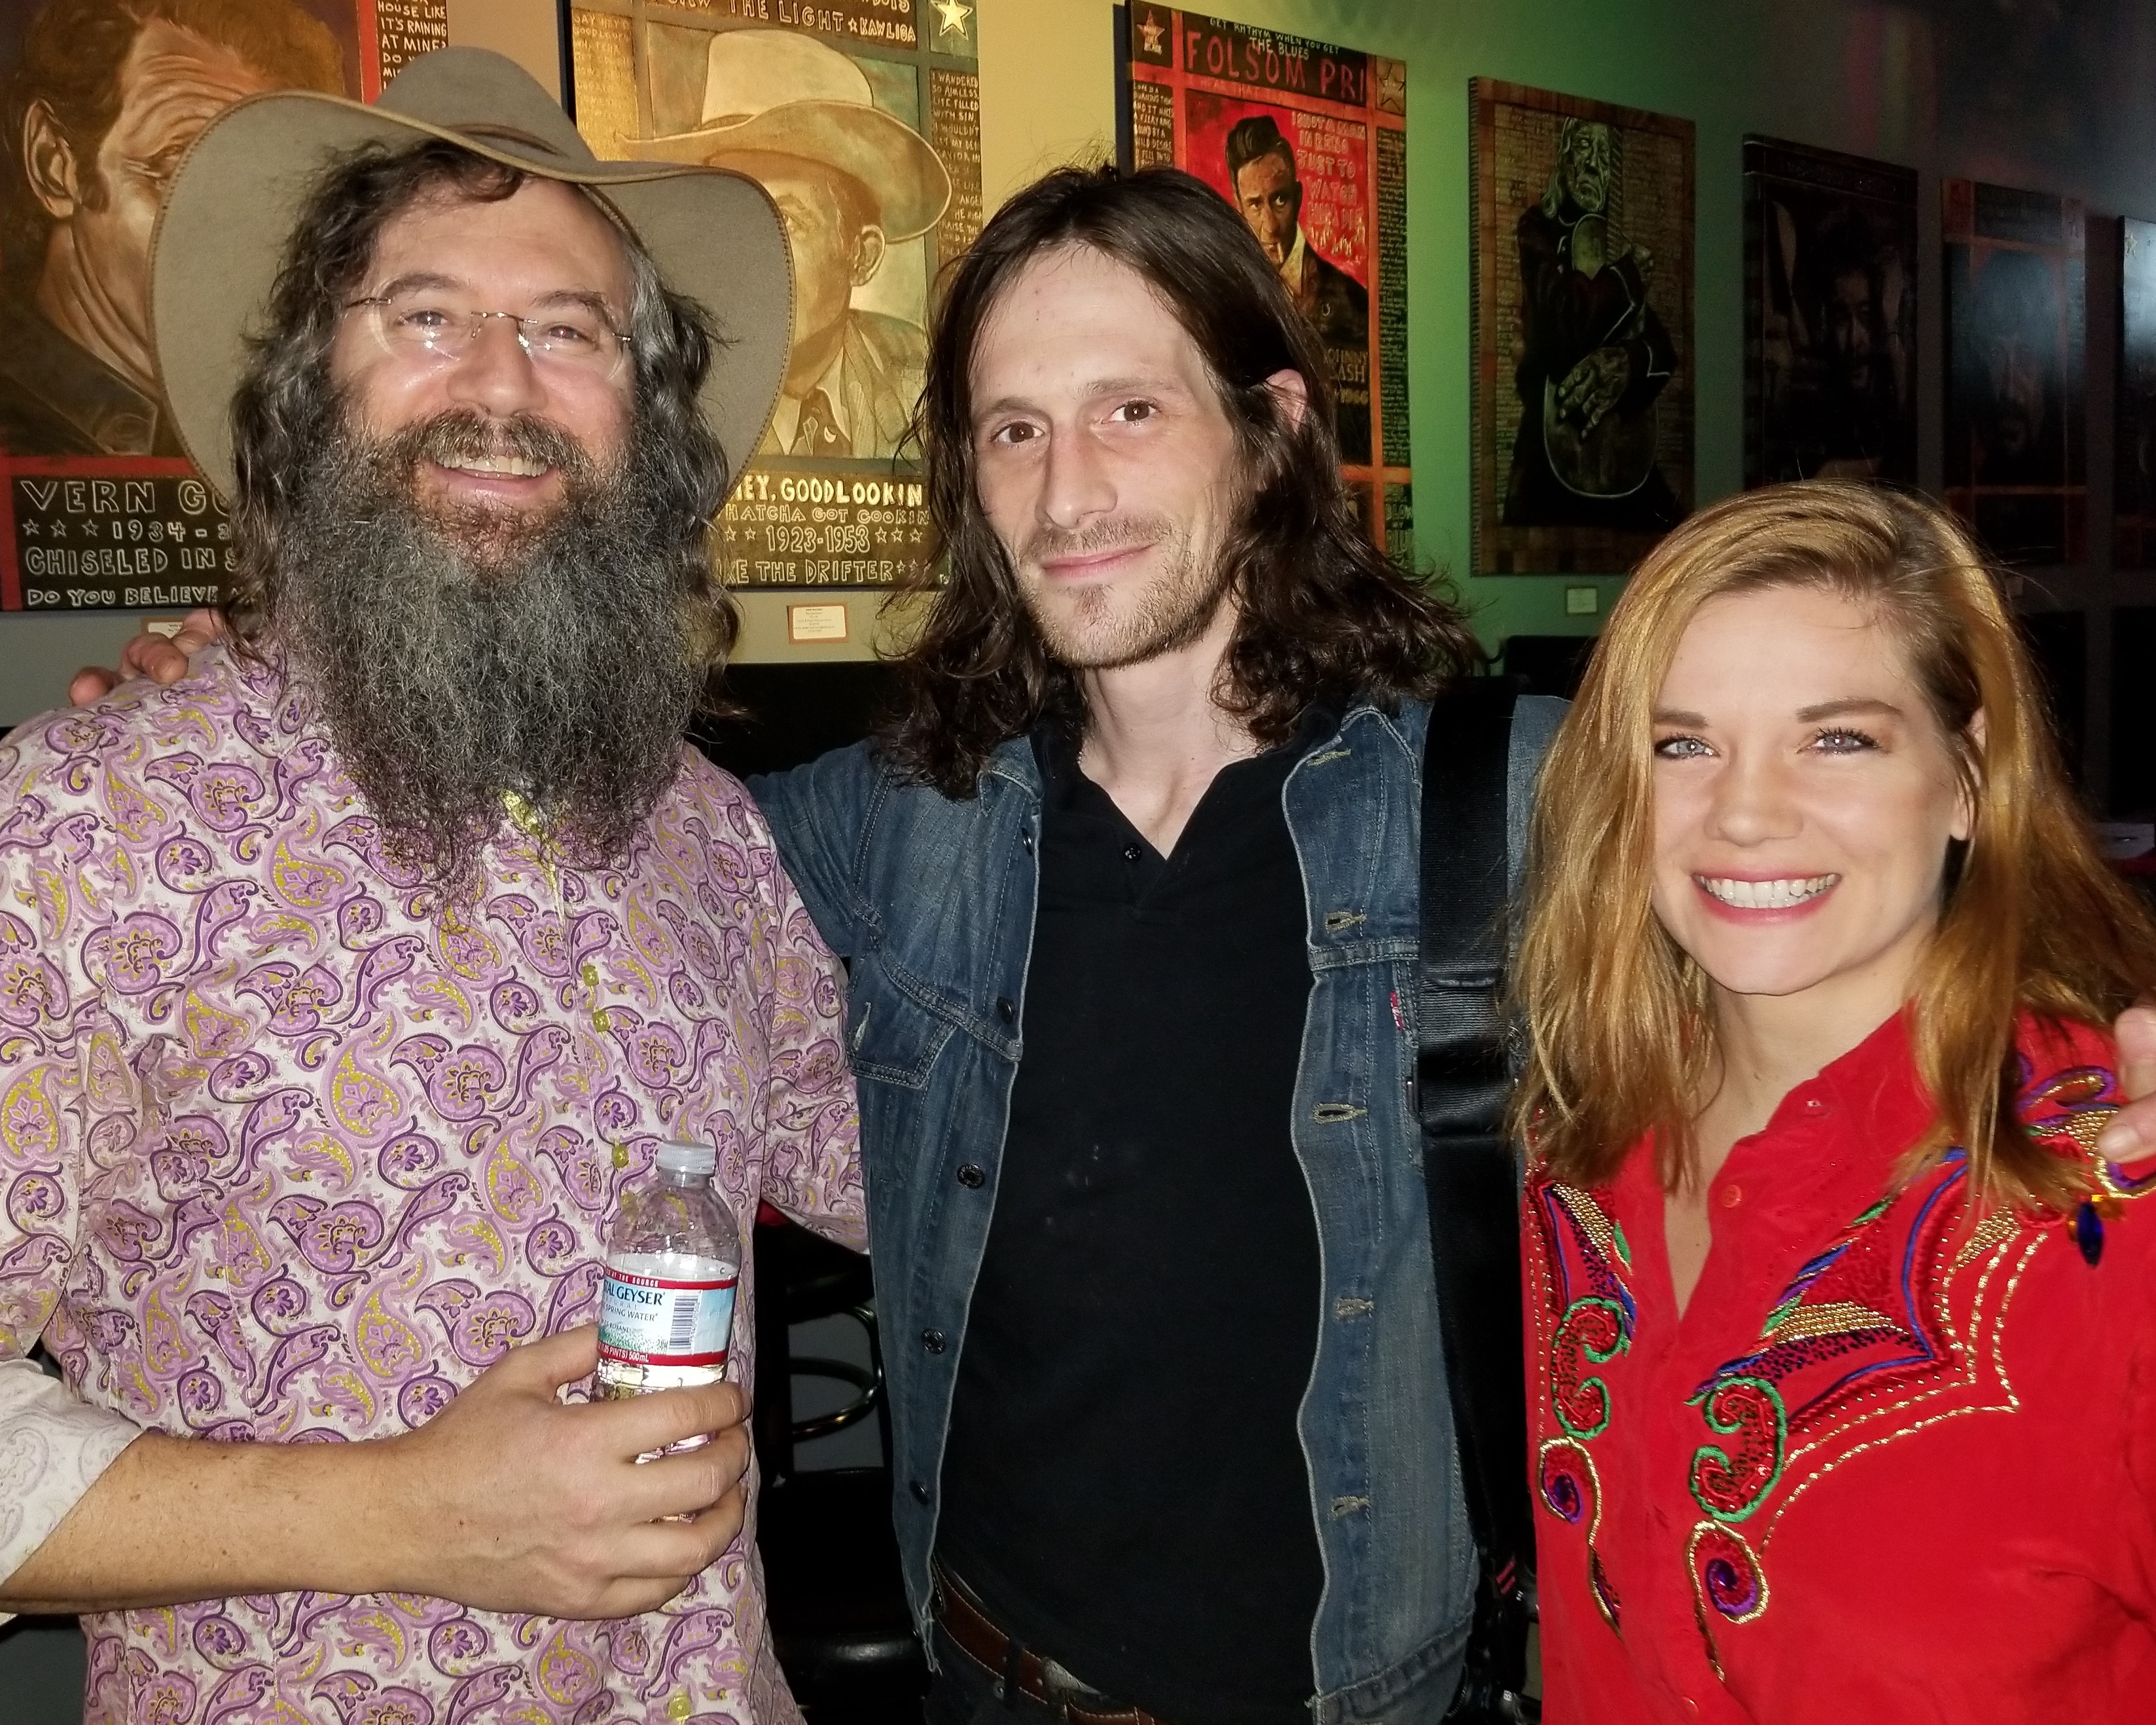 Lazer Lloyd after his show backstage at 3rd and Lindsley in Nashville with Rolling Stone Country photographer Jordan O'Donnell and Improv comedian Brittany Birrer.